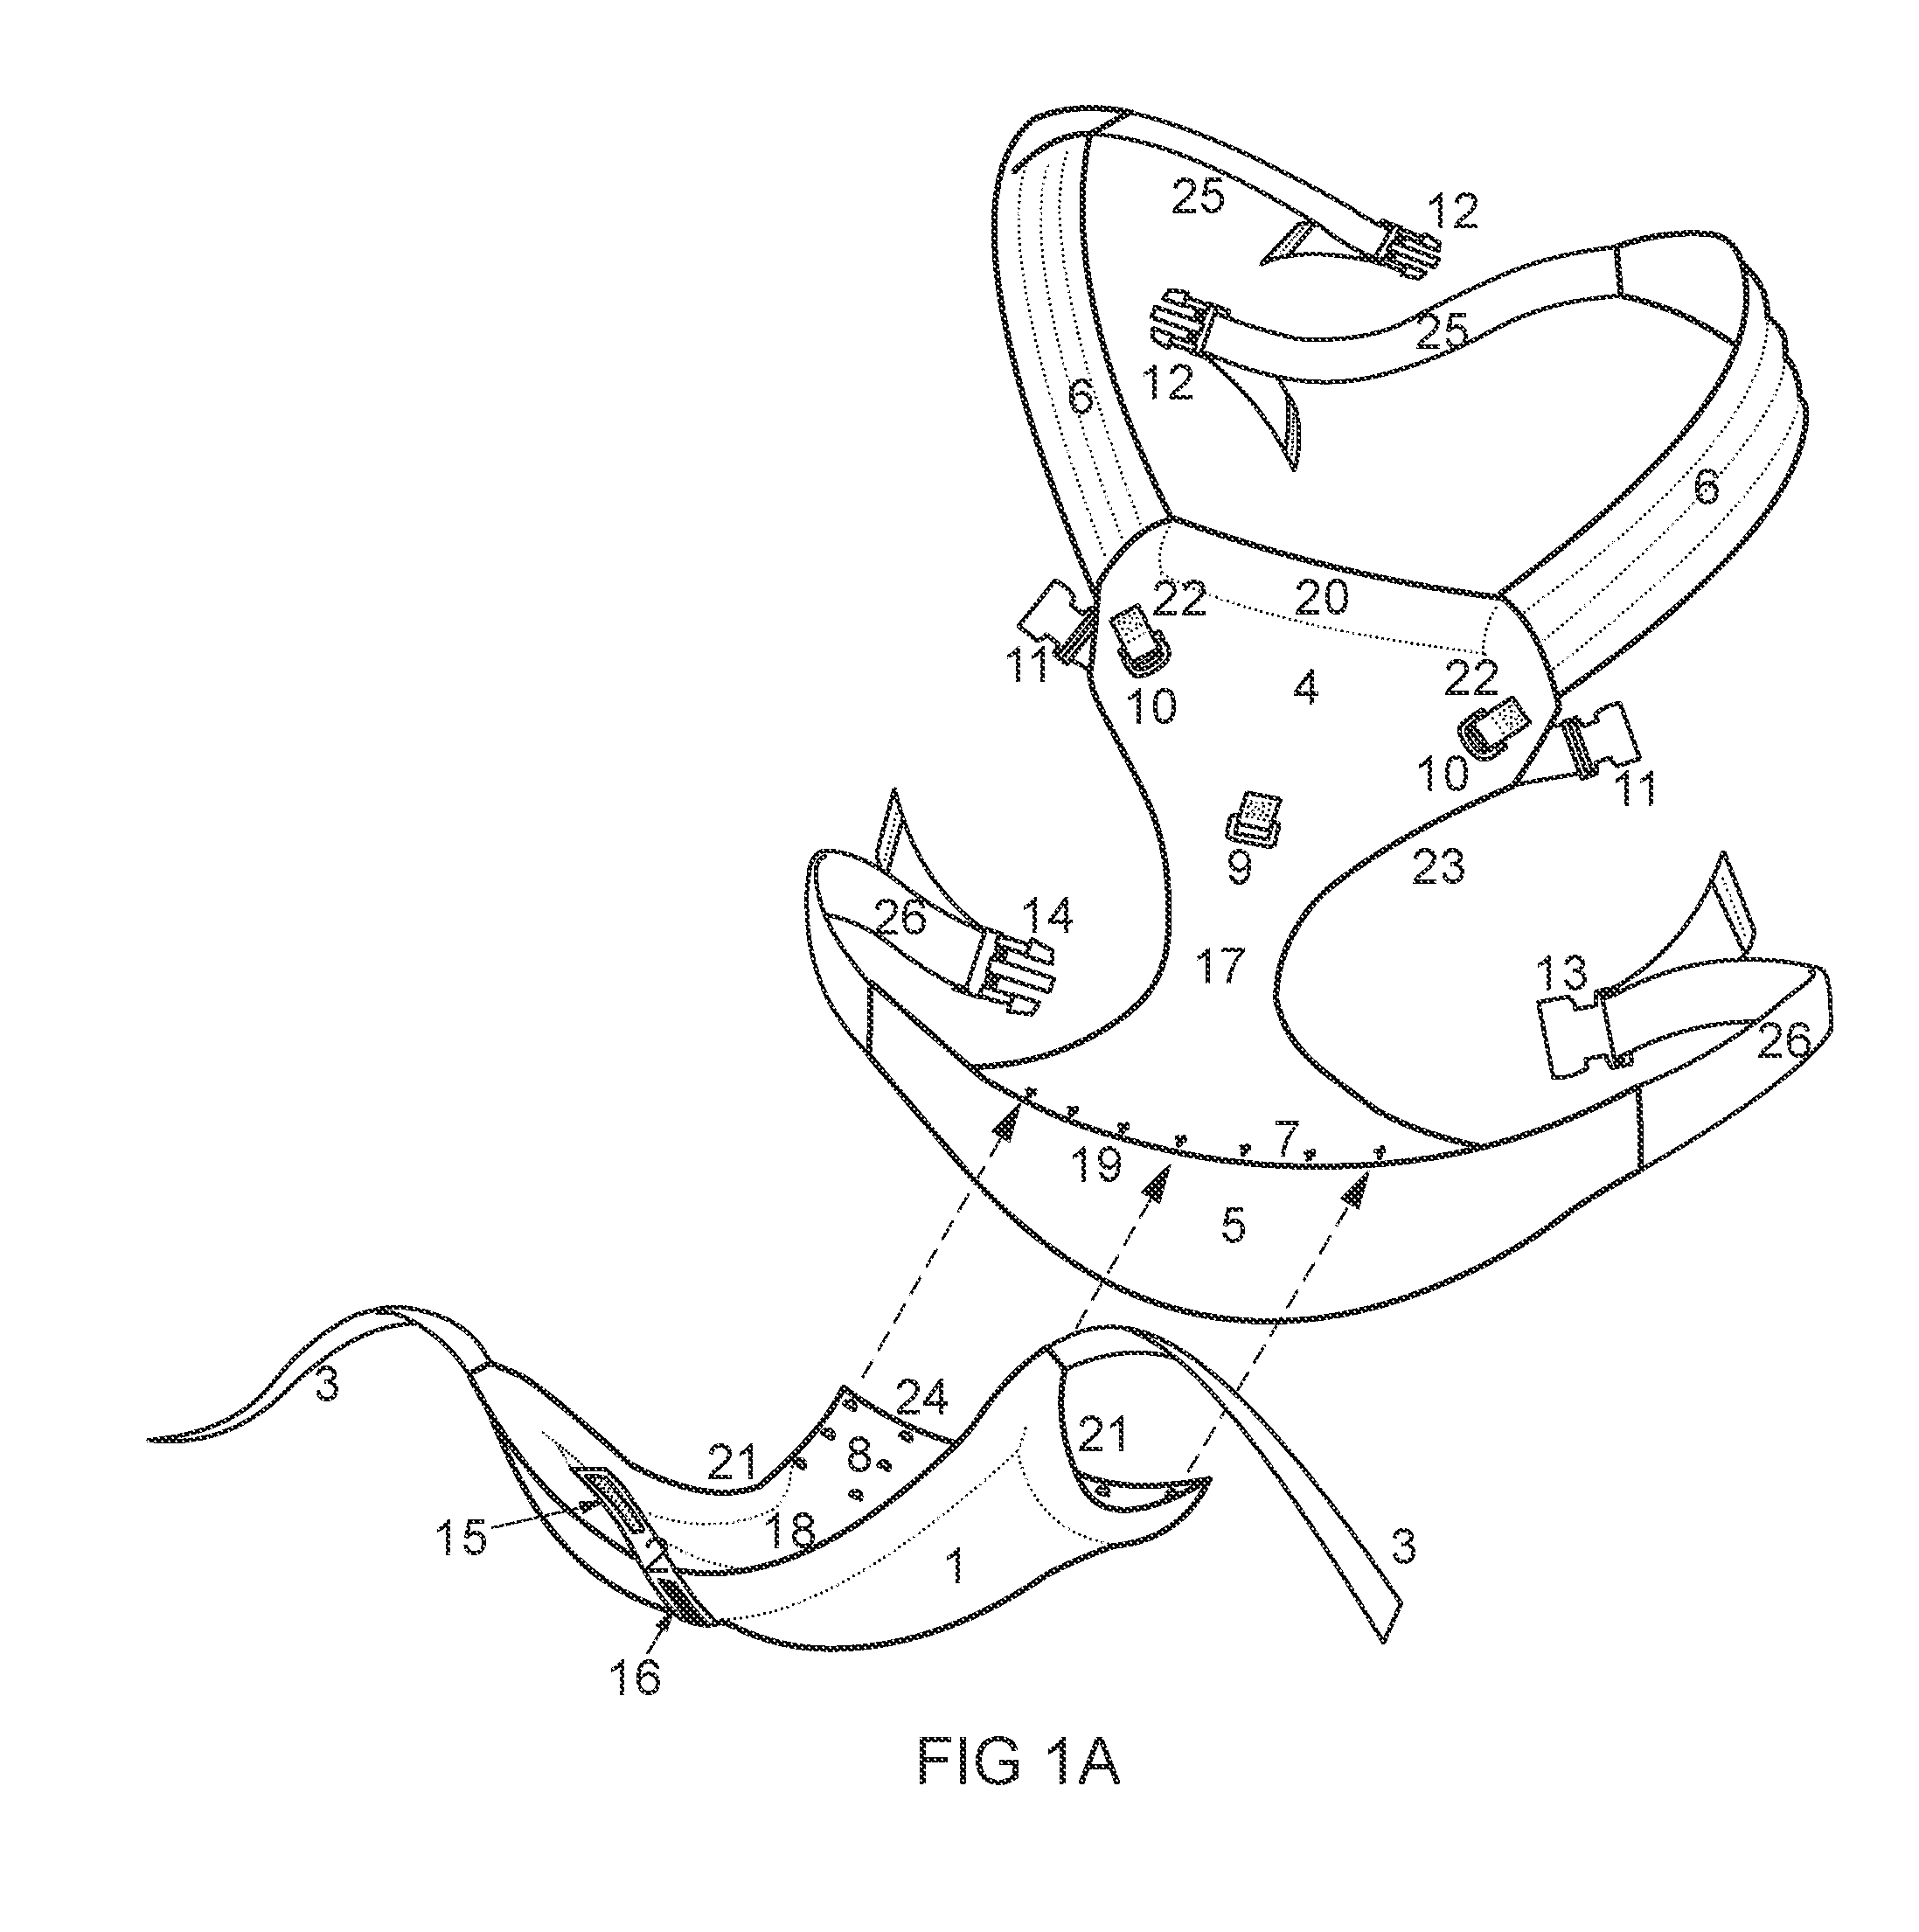 Apparatus for a Baby Carrier